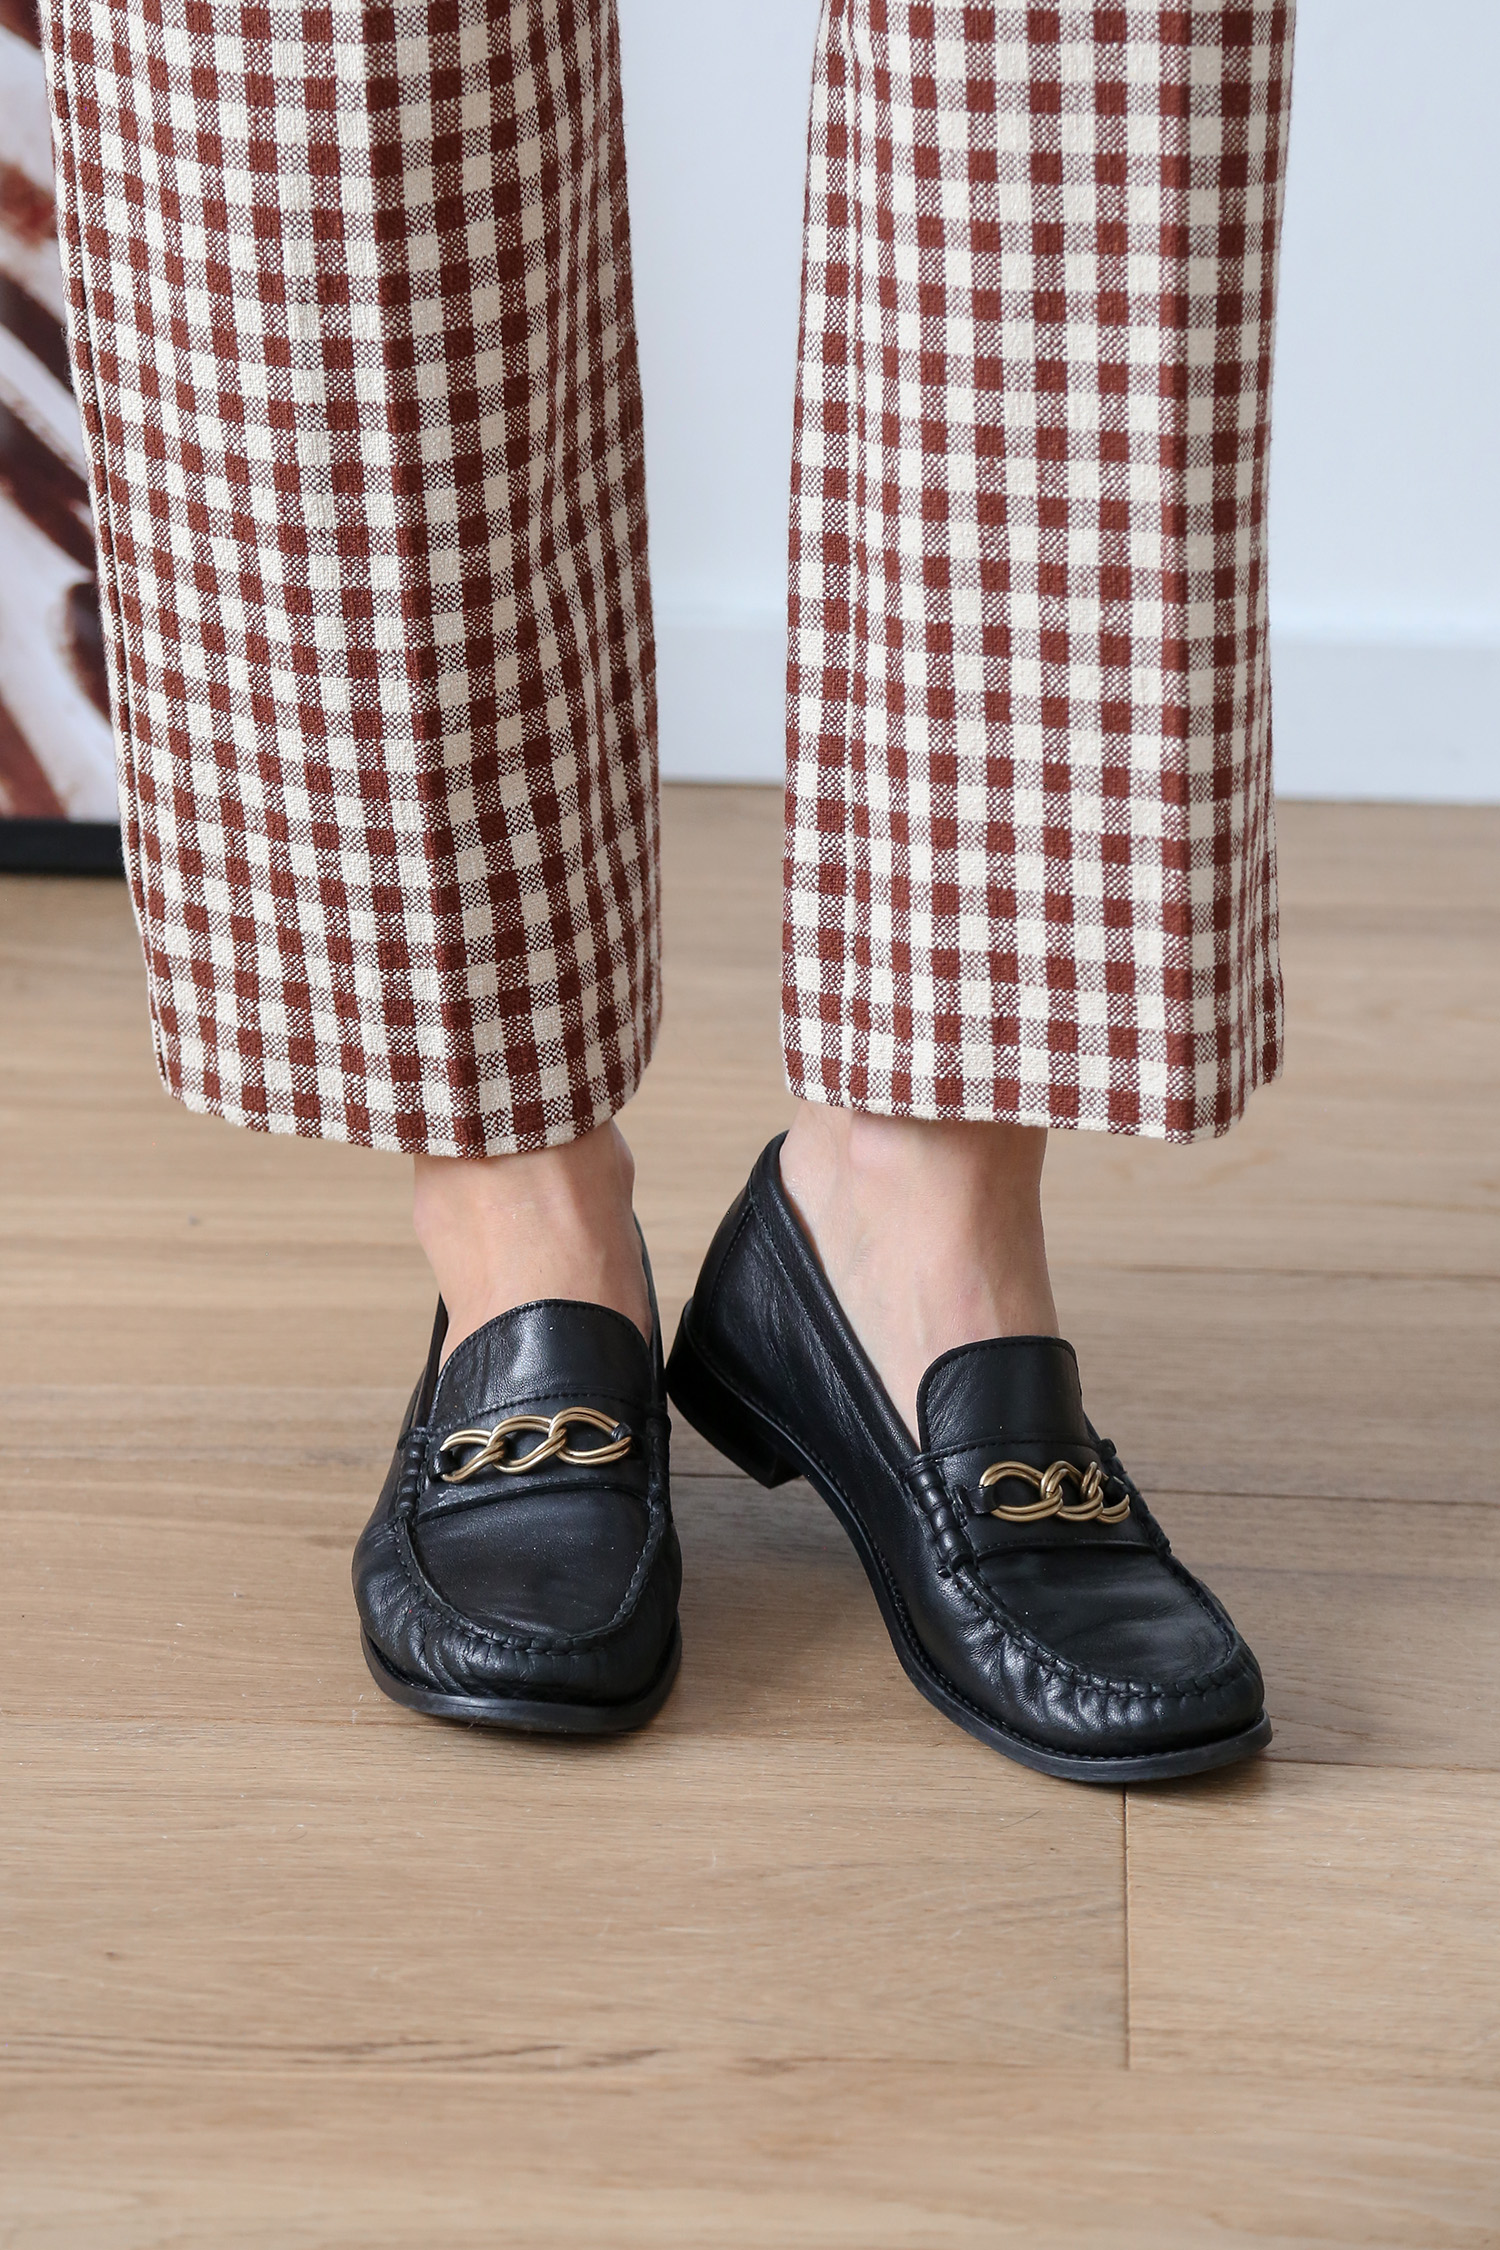 French Girl Style Black loafers with chain detail